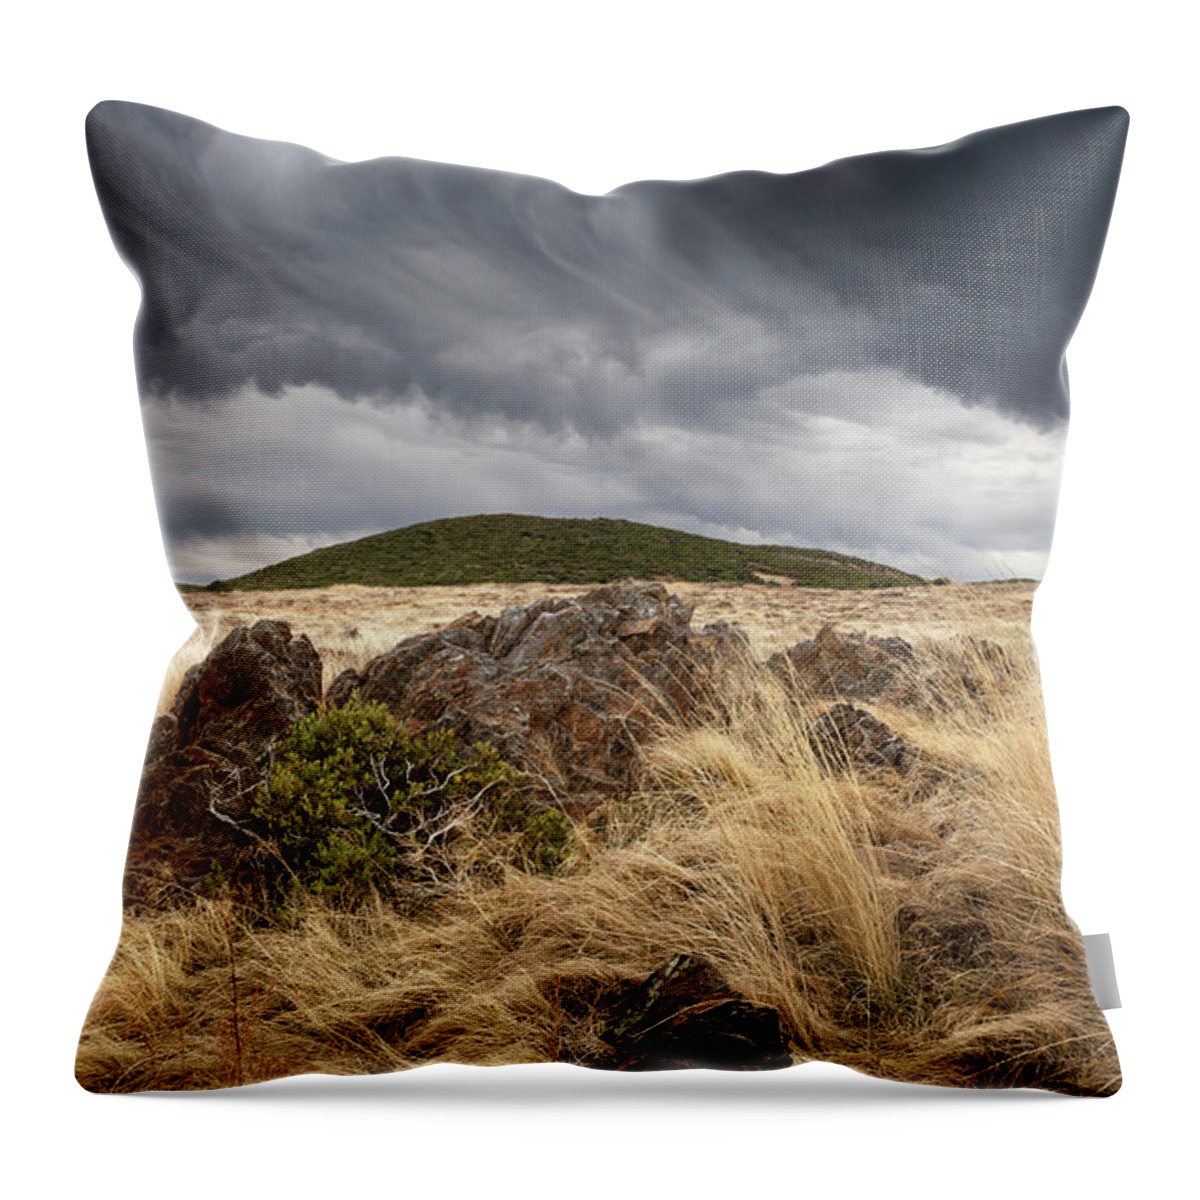 San Diego Throw Pillow featuring the photograph Deep San Diego Clouds by William Dunigan